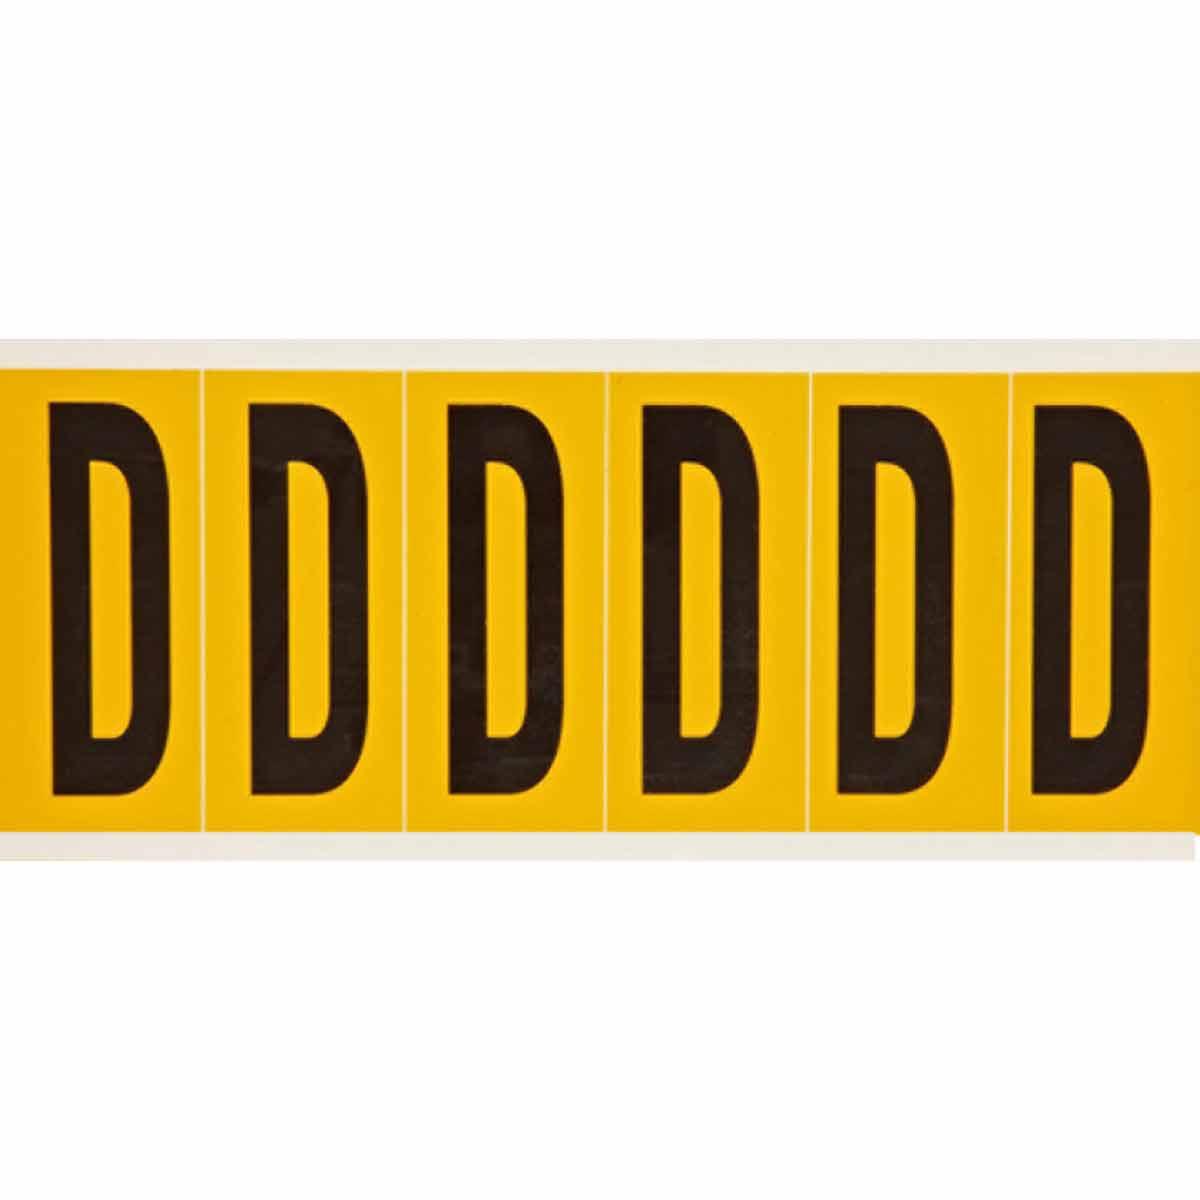 Brady® 1550-C Non-Reflective Standard Letter Label, Black C Character, 2.938 in H, Yellow Background, B-946 Vinyl